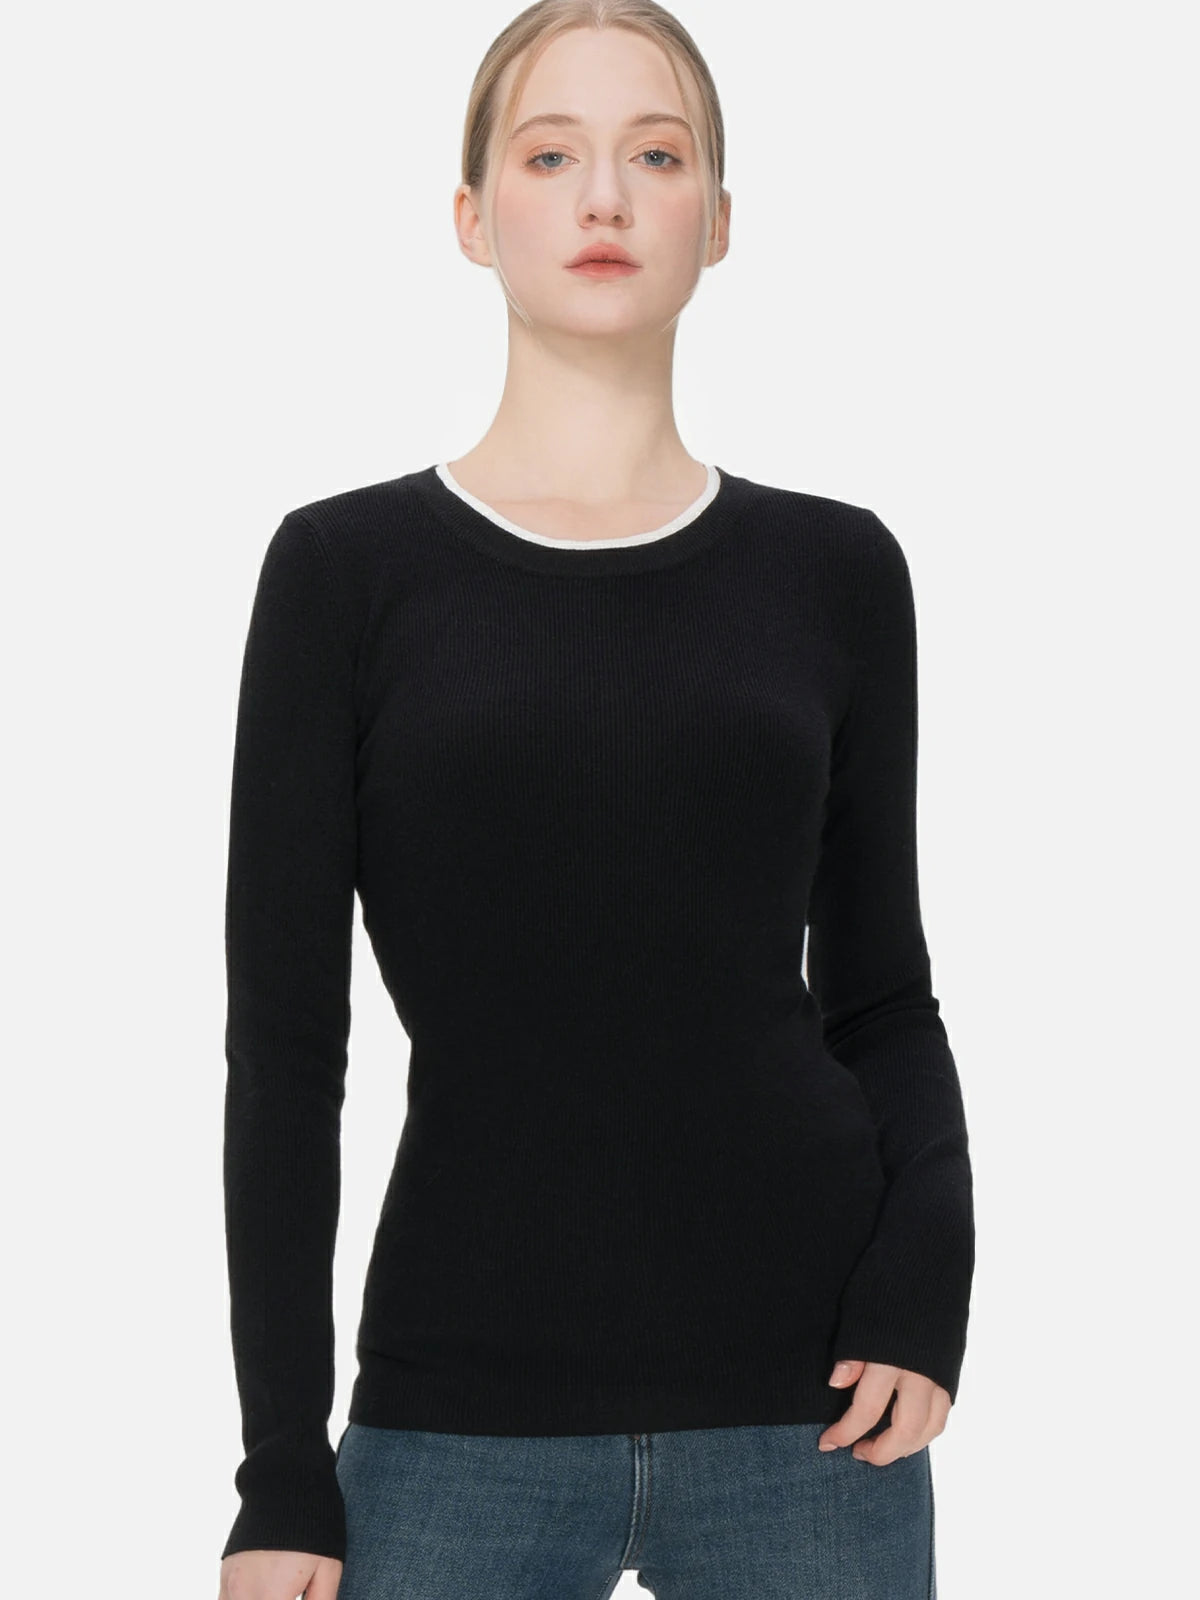 Fashionable design of the black round-neck slim-fit knit sweater